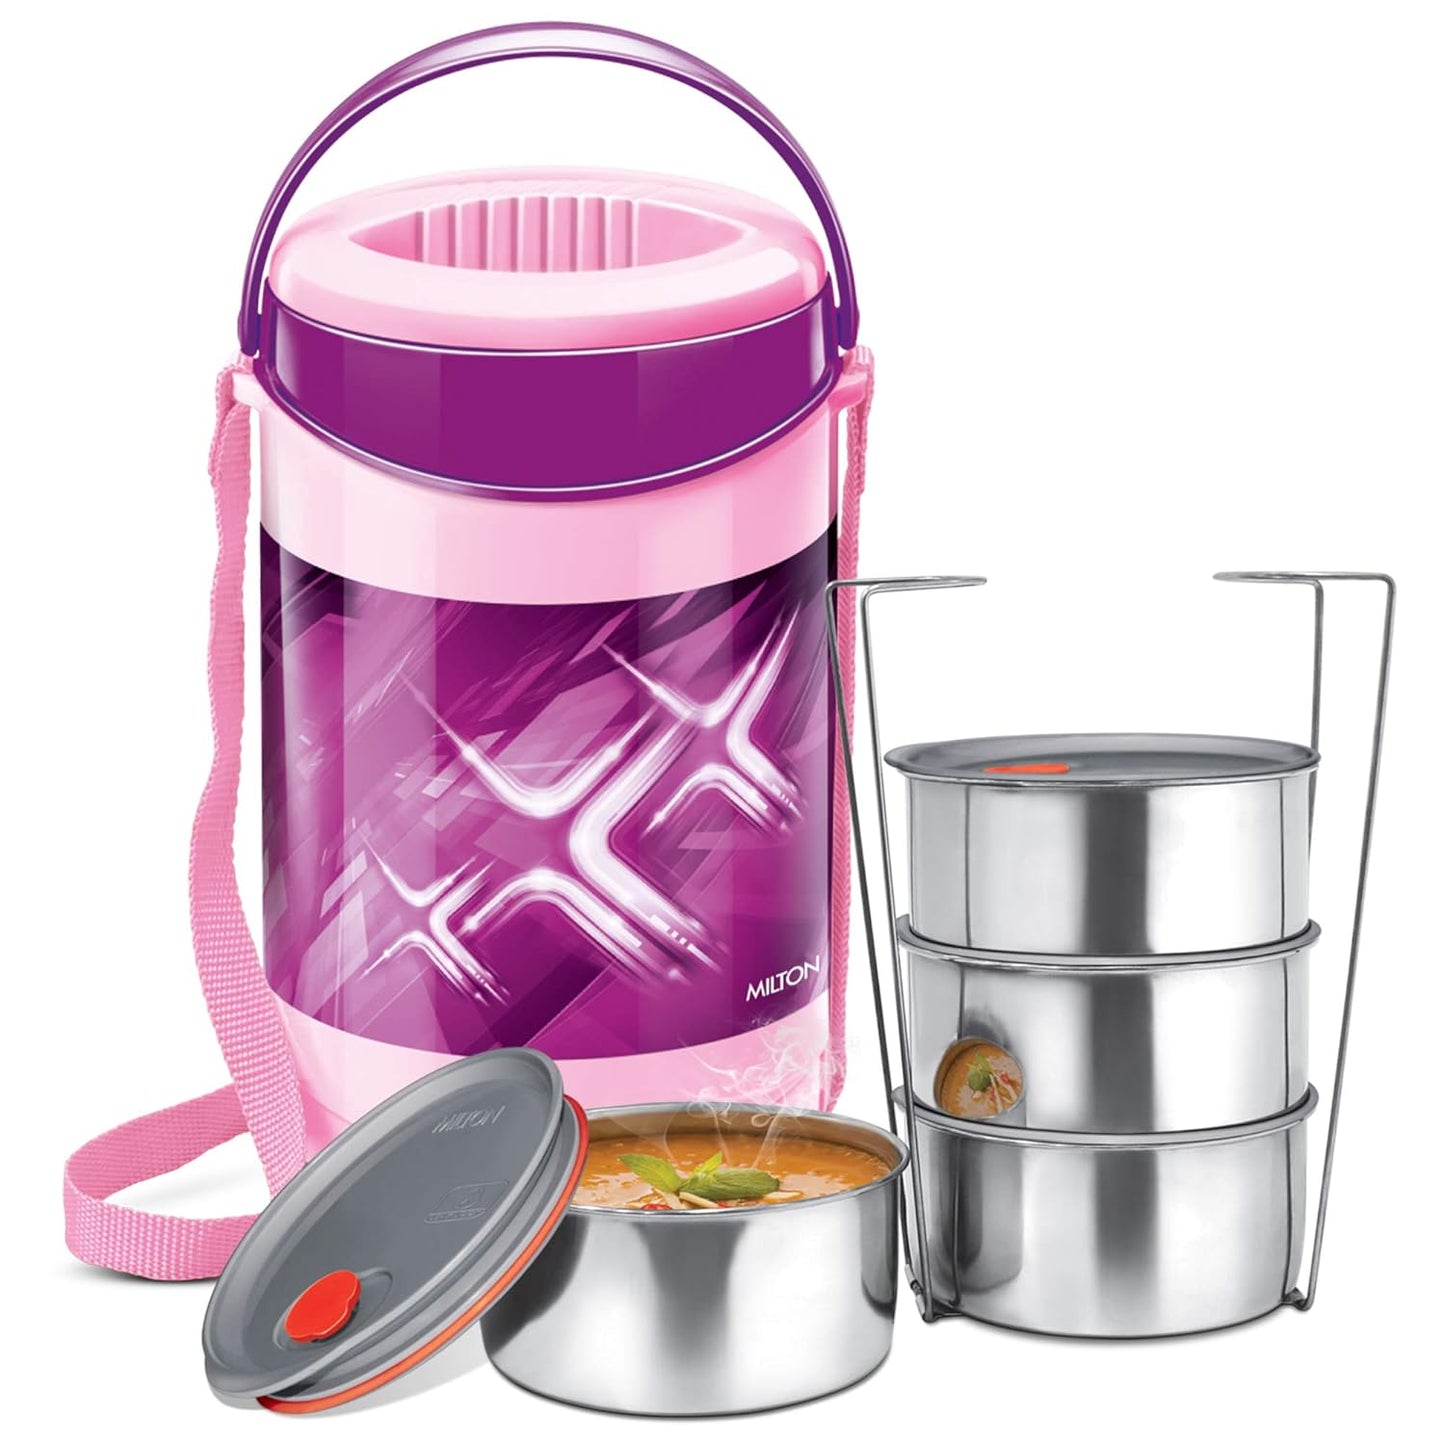 MILTON Econa Deluxe 4 Lunch Box (4 Container), Purple , Plastic & Stainless Steel